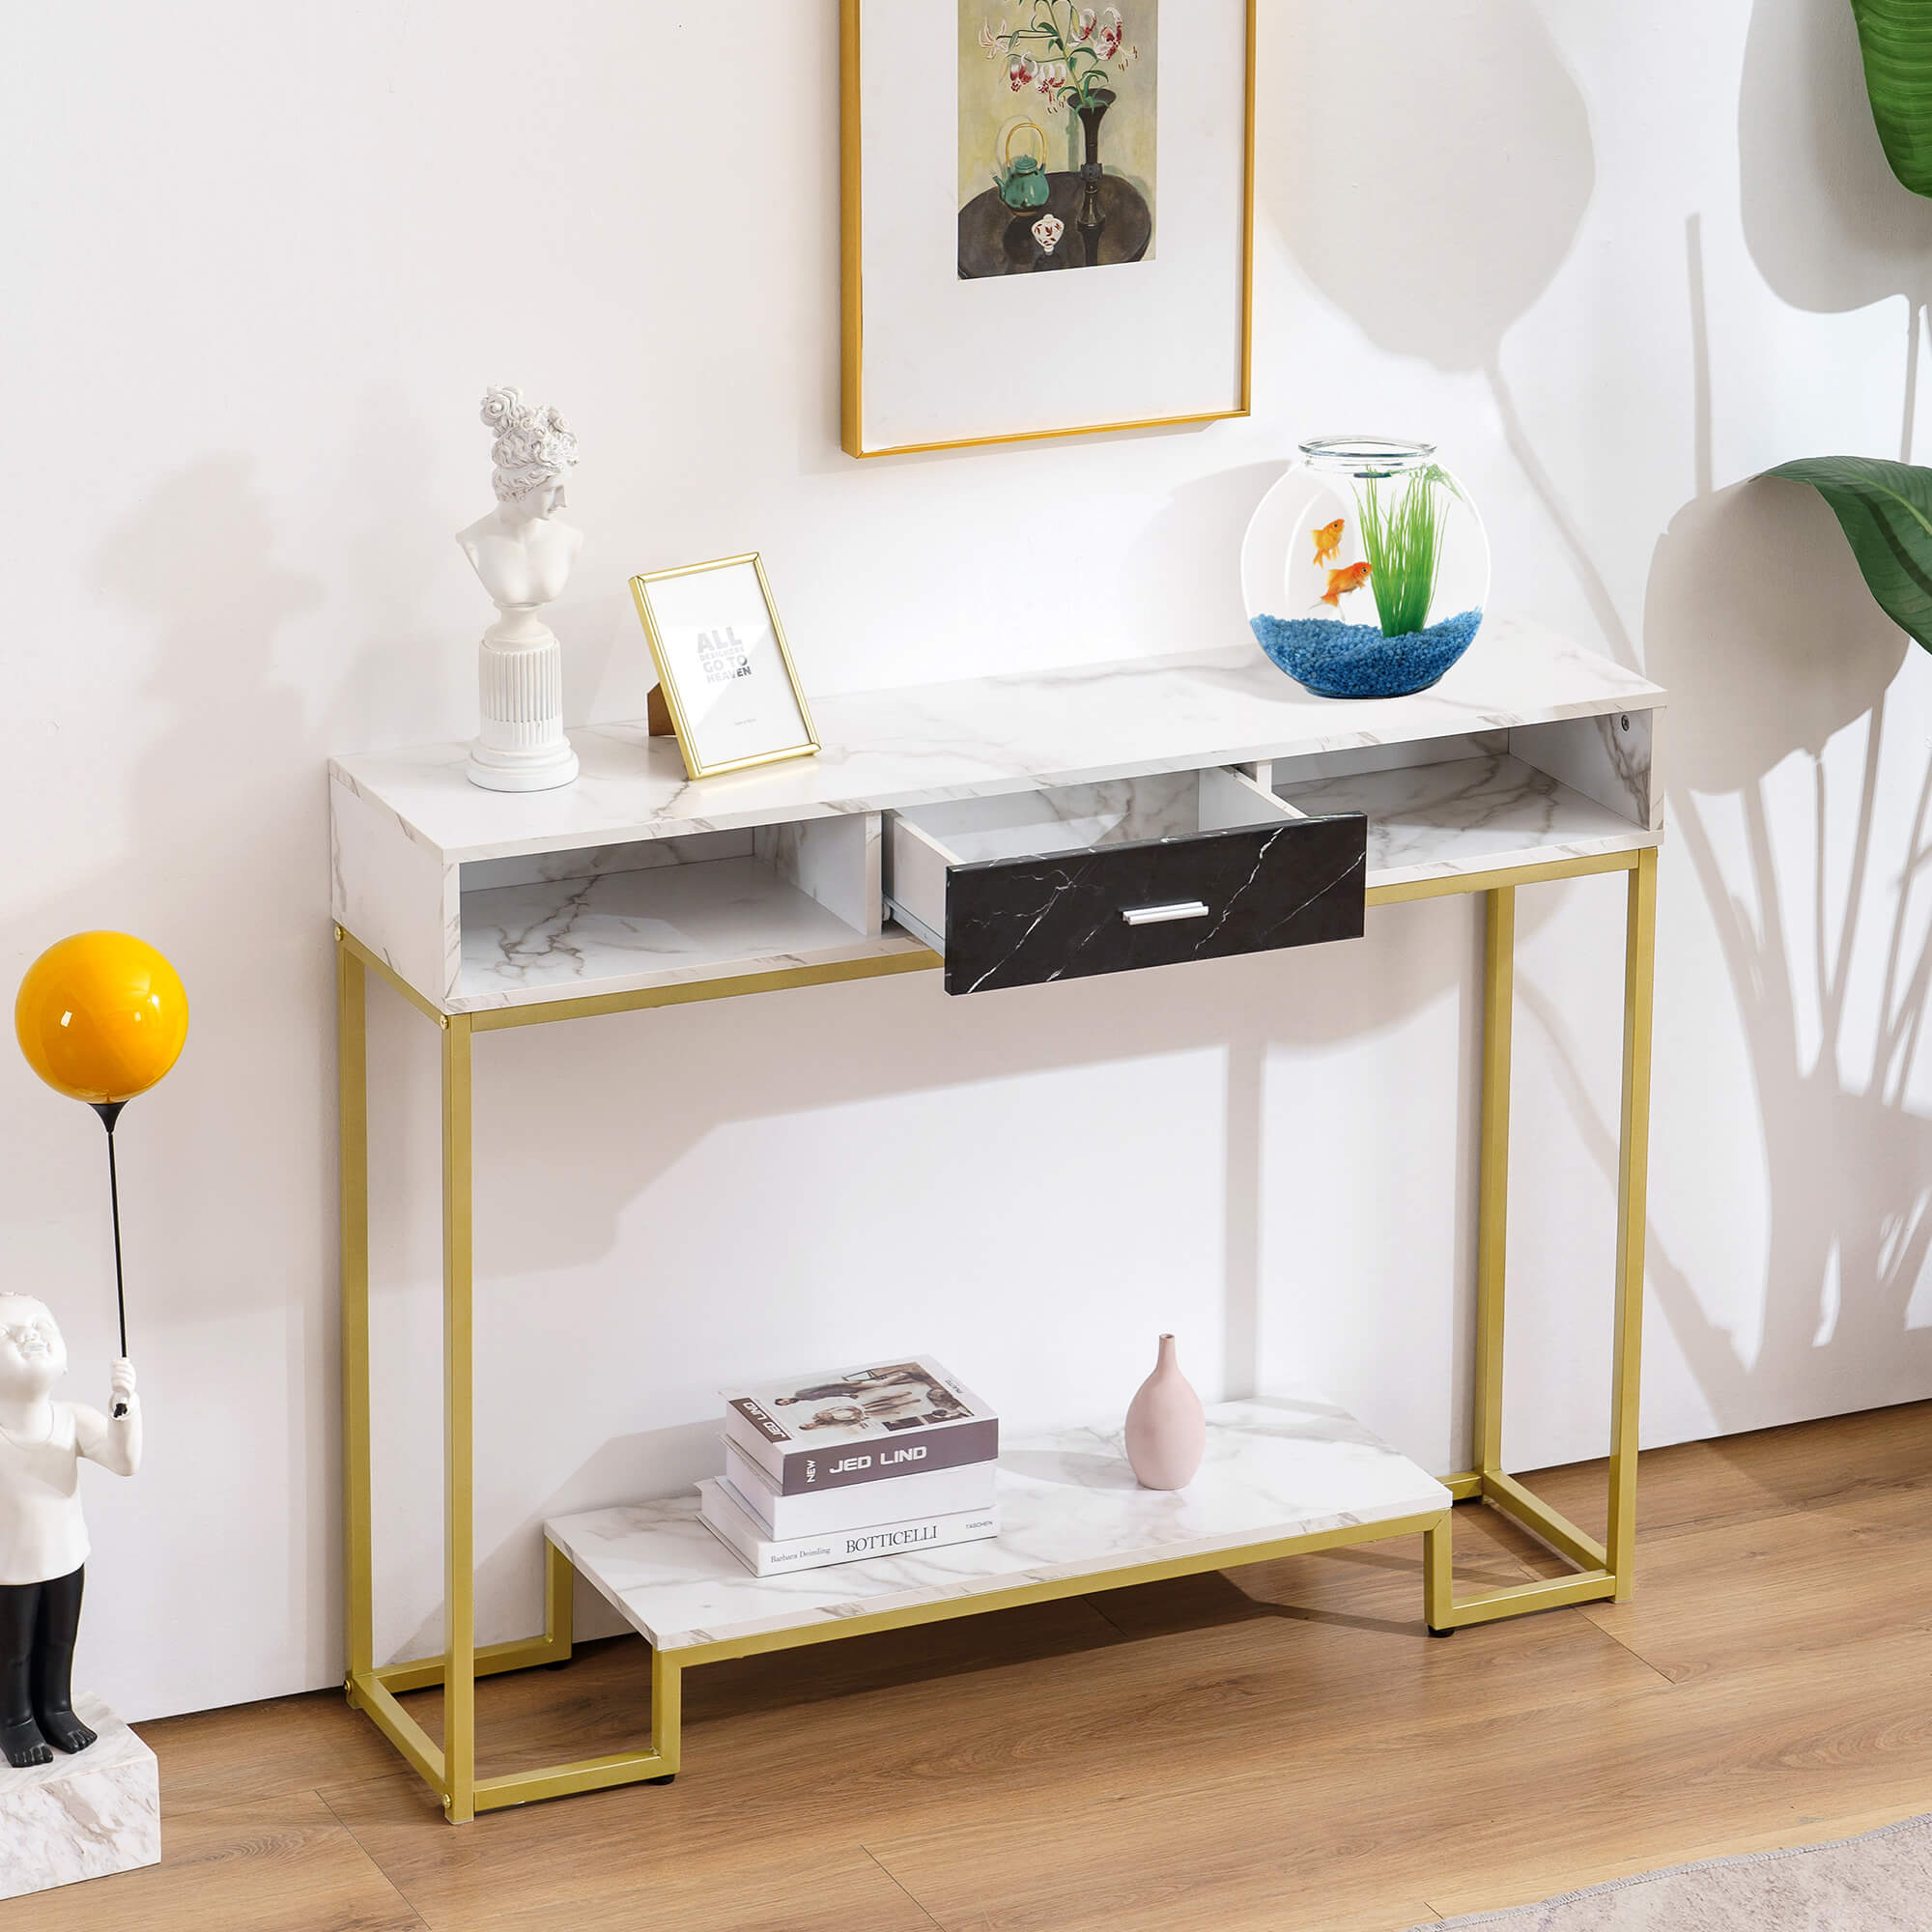 ivinta Console Table with Drawers, Gold Entryway Table with Shoe Storage, Narrow Long Sofa Tables